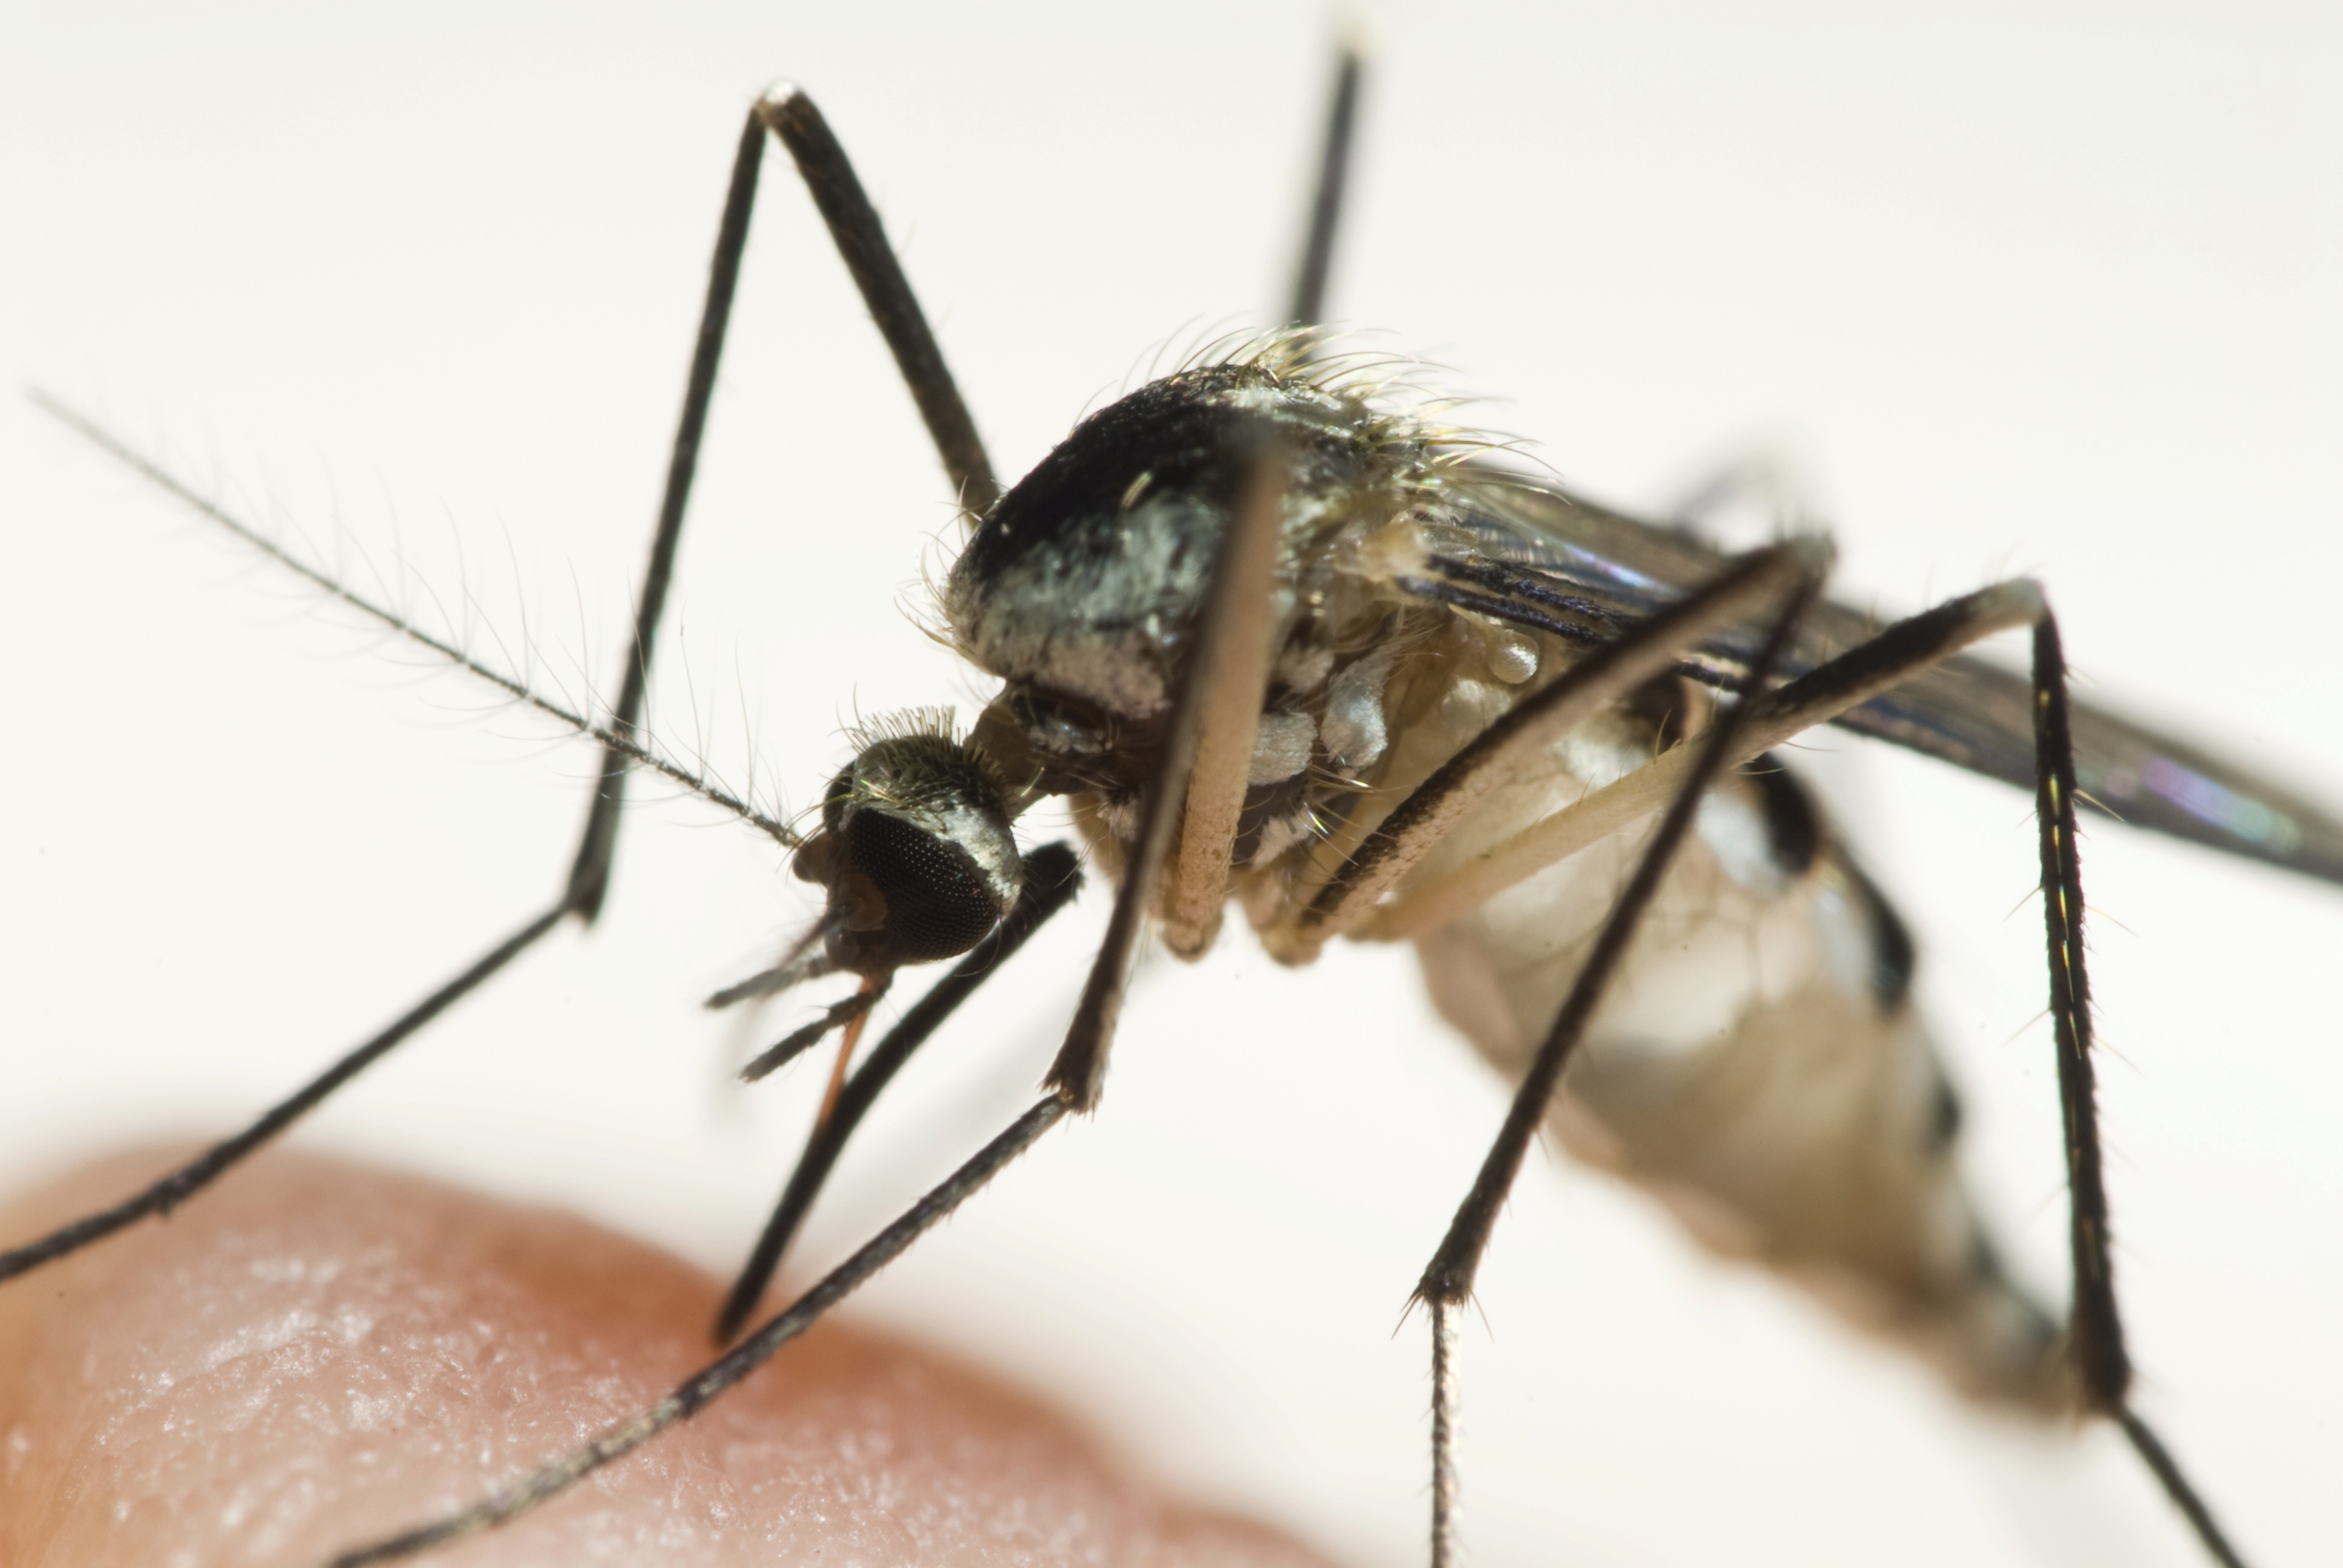 Extreme closeup of mosquito found prior to providing Mosquito Control in Lewes